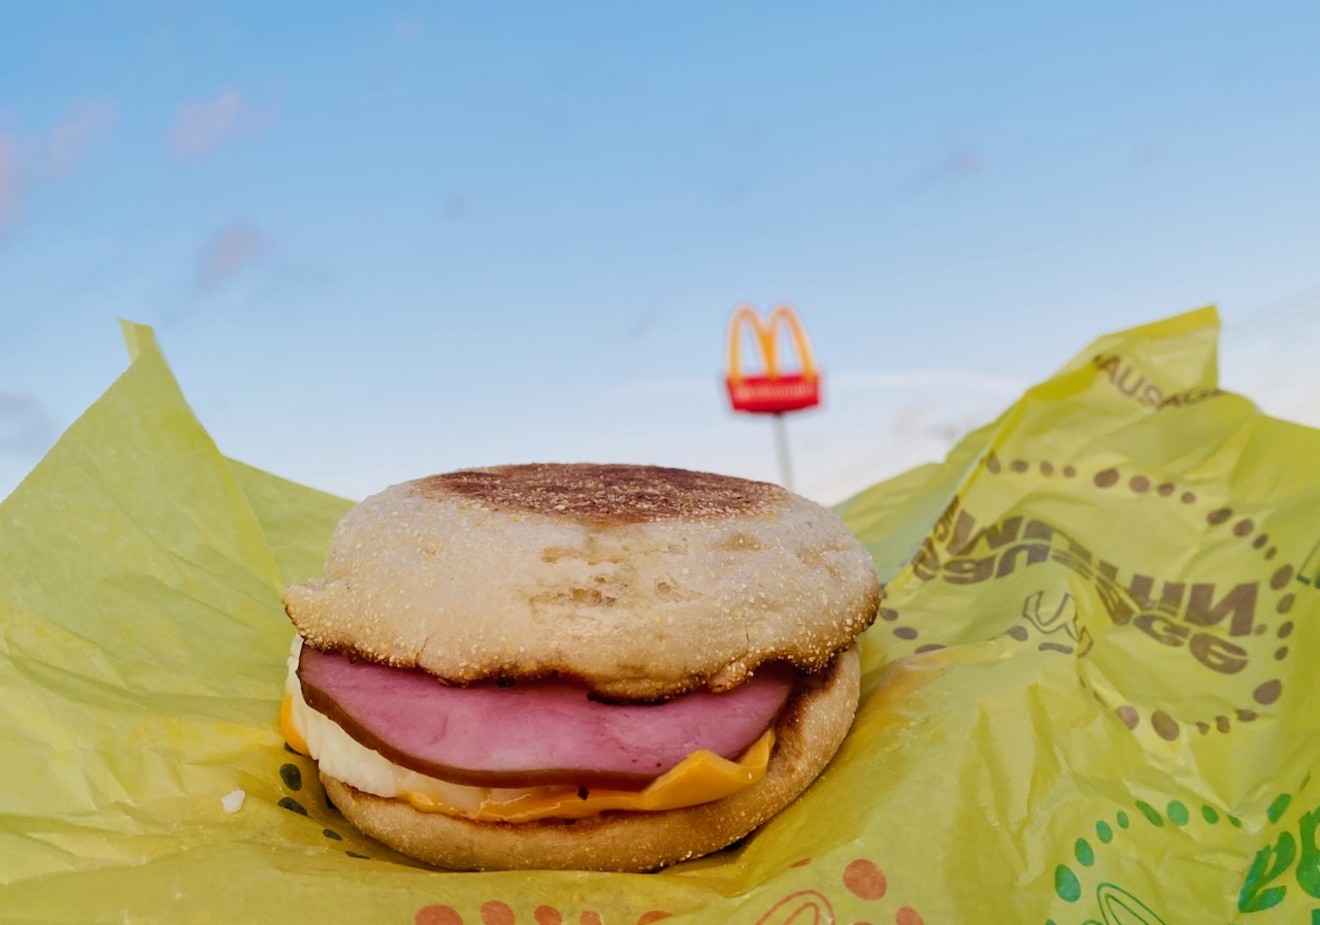 McDonald's Egg McMuffin breakfast sandwich is 50 years old. We mean its creation, not the actual sandwiches.